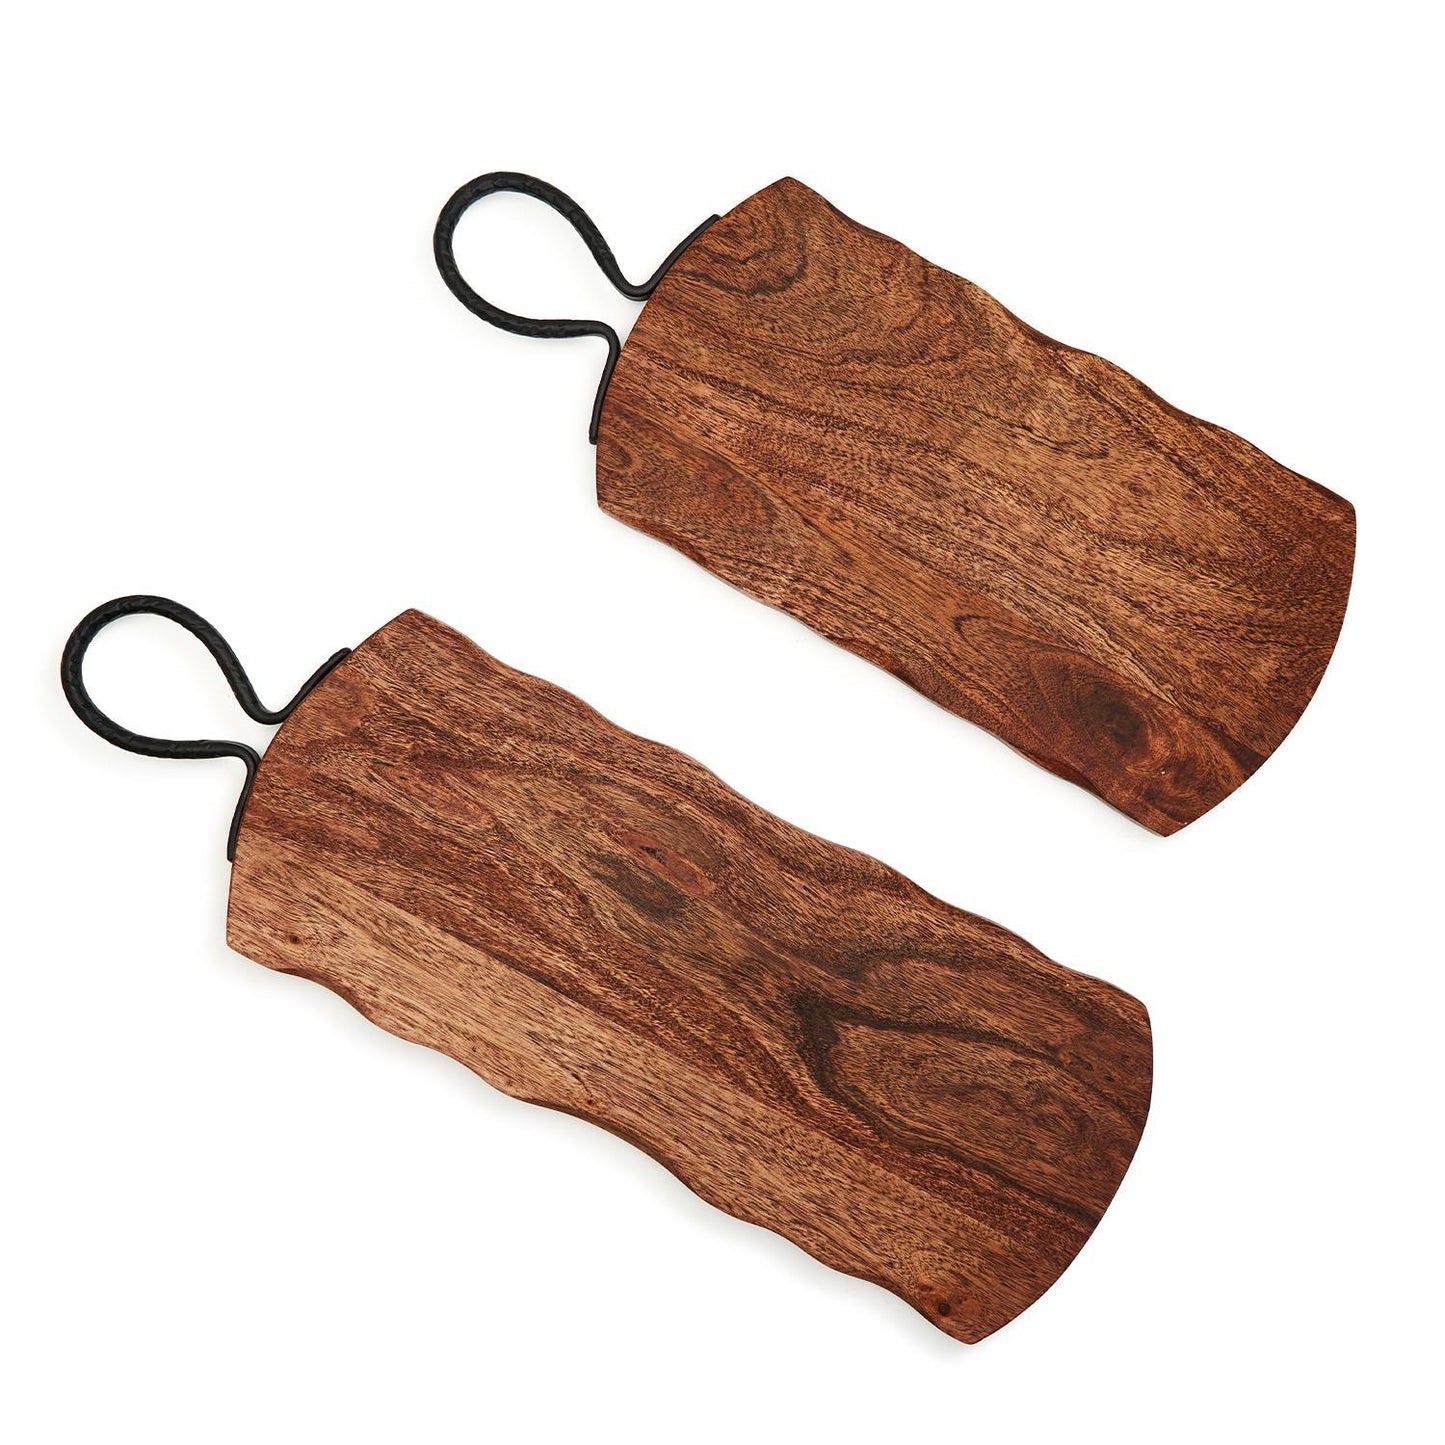 Rustic Edge S/2 Serving Boards w/Hammered Iron Handle